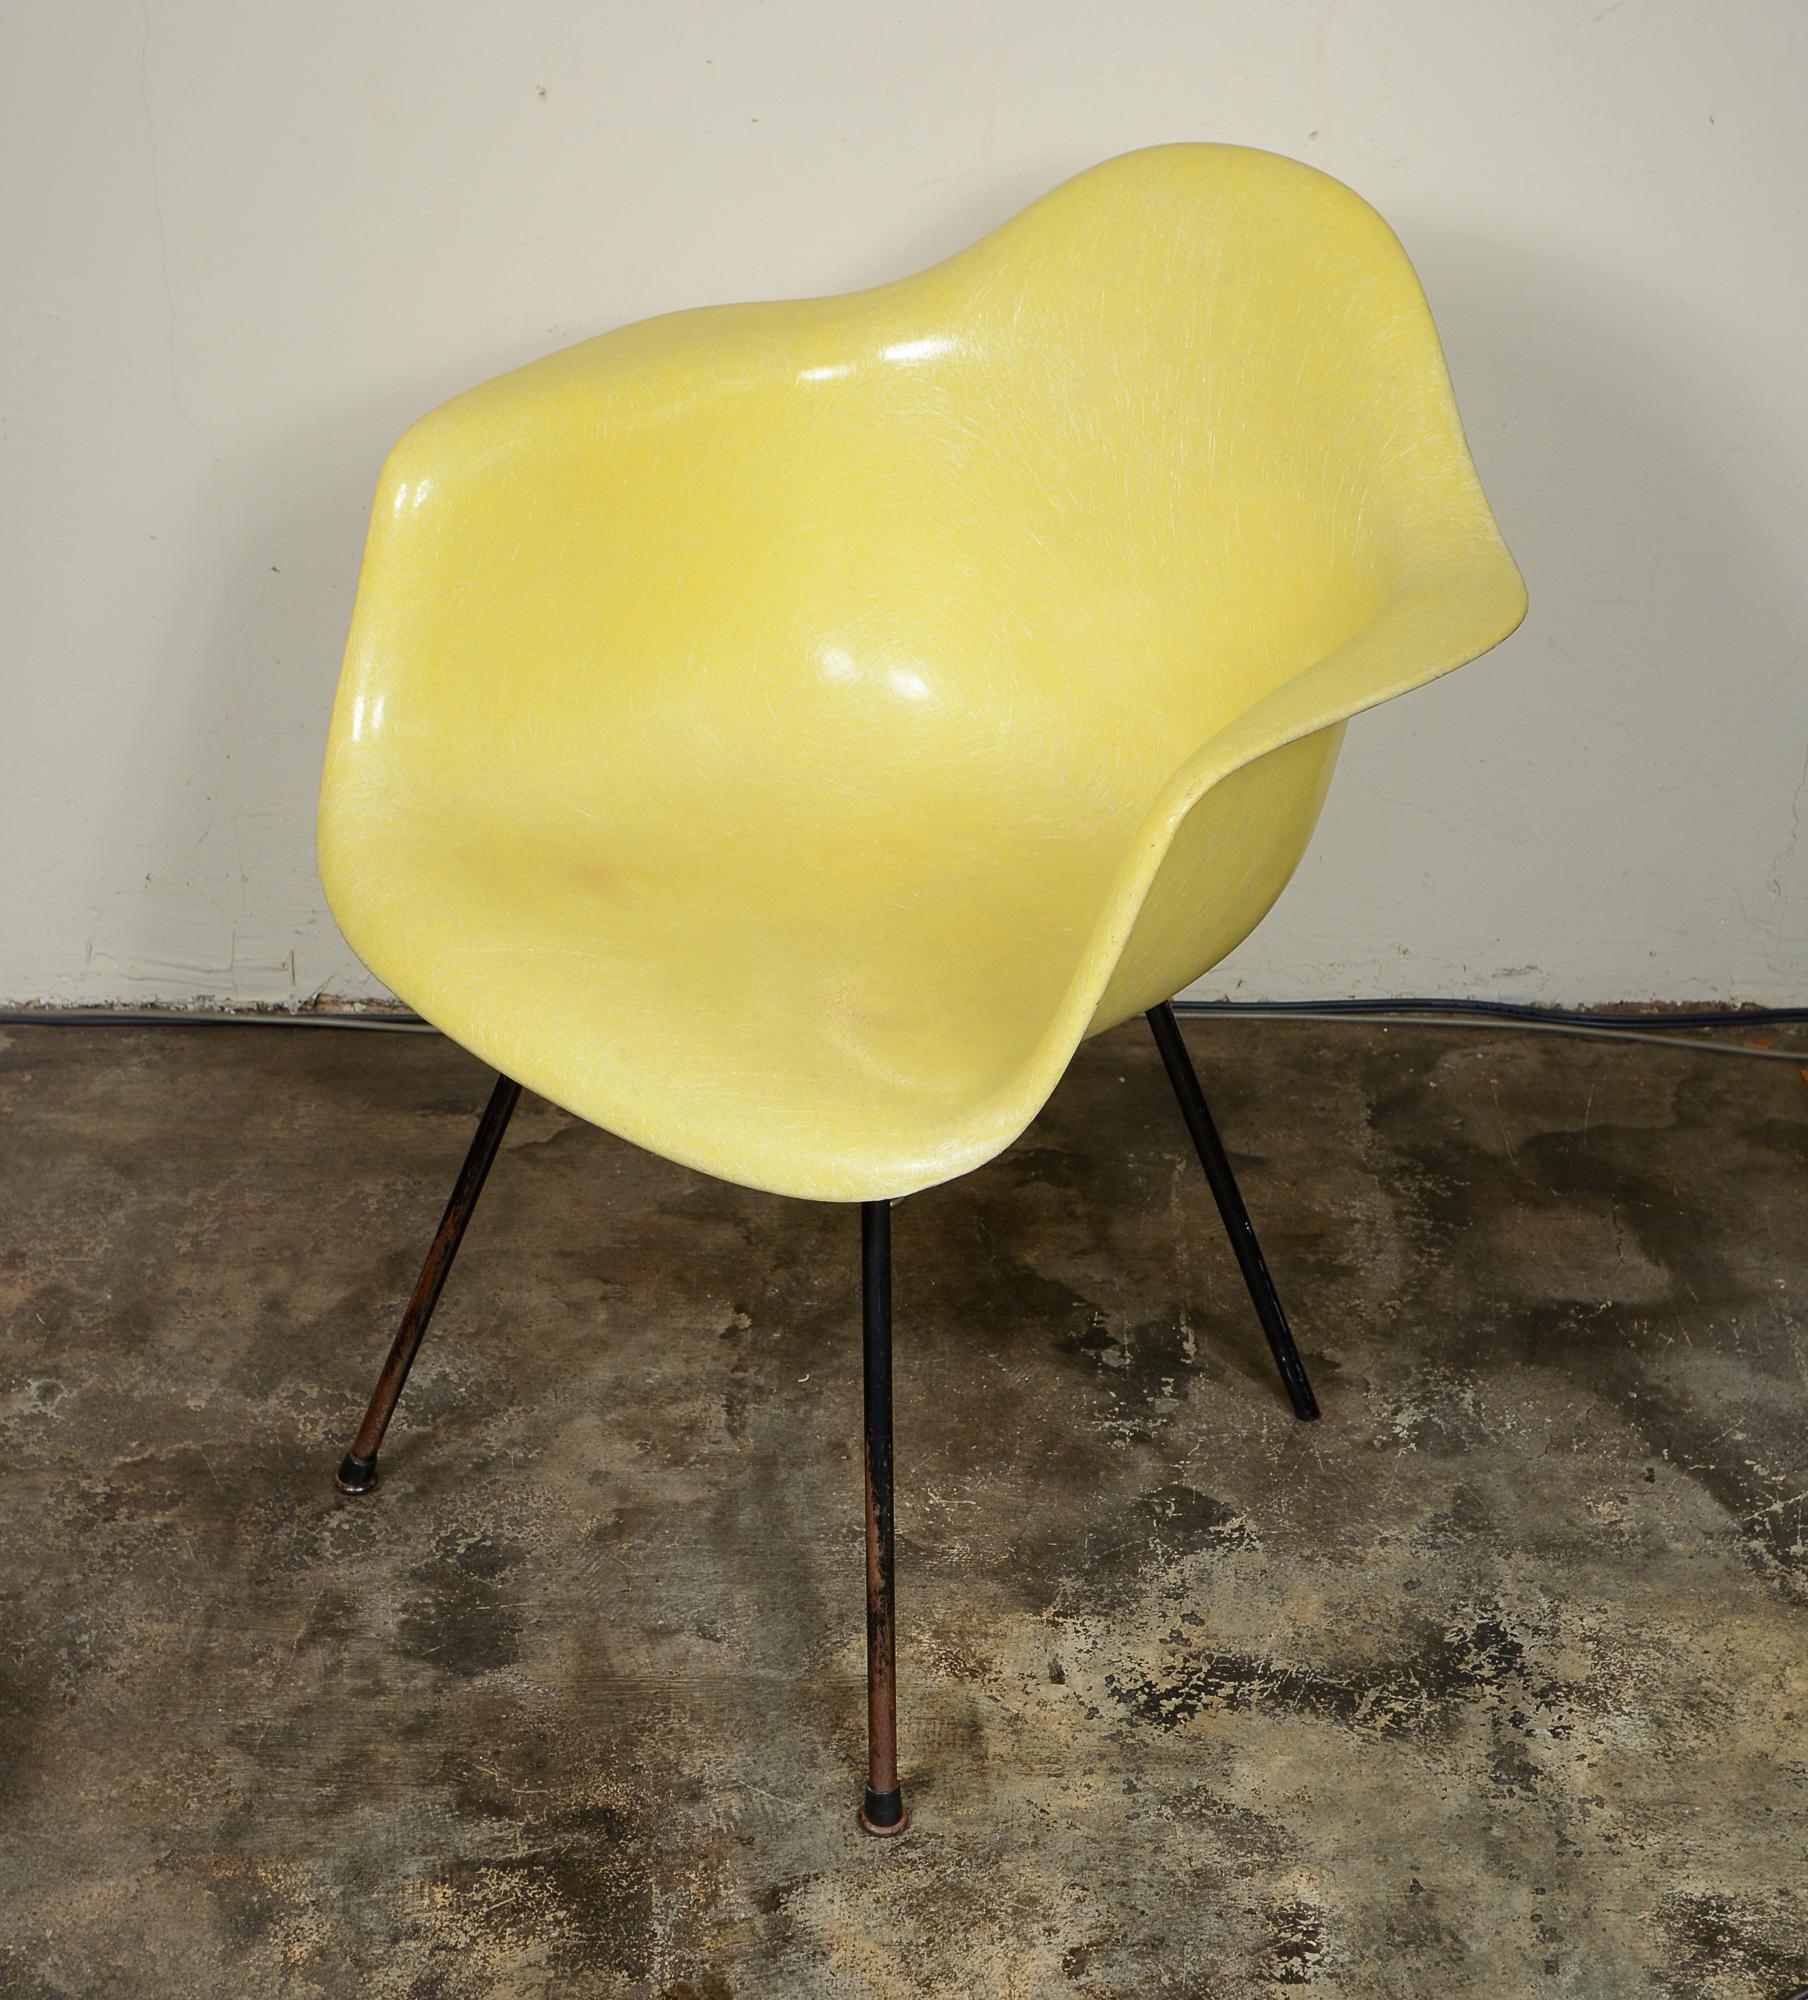 Second generation Zenith fiberglass armchair by Charles and Ray Eames. This chair is lemon yellow. The chair is missing one glide. The screws are likely not original. There are a couple of scratches. There is some wear at the edges. The shock mounts